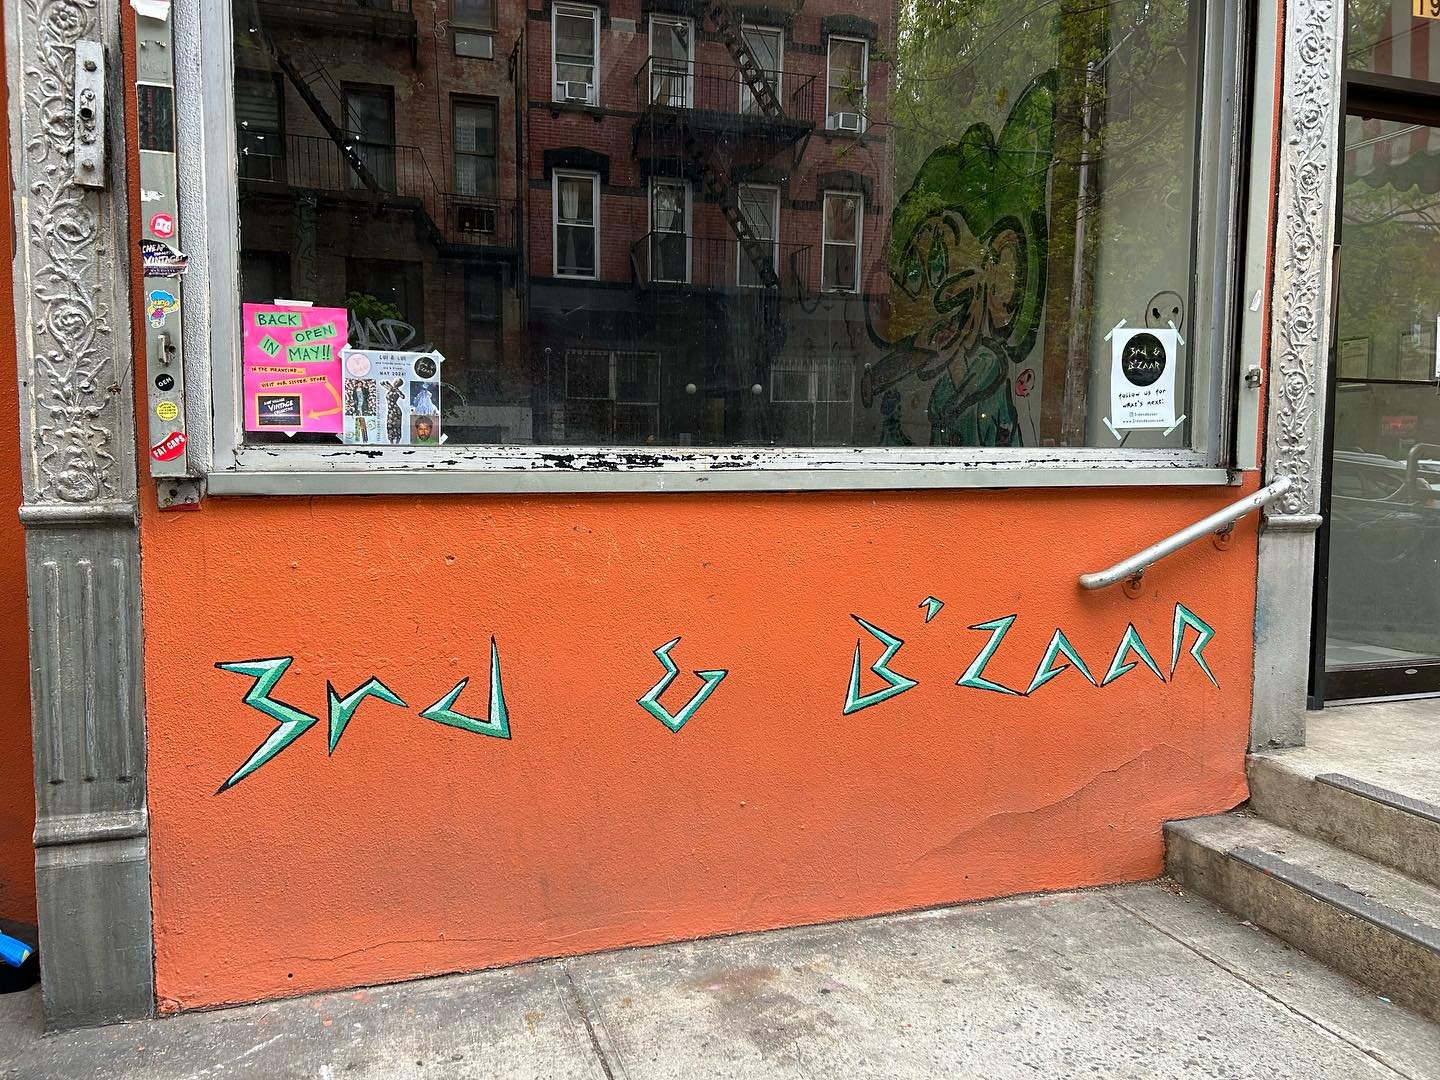 Lots of fun &amp; fabulous changes going on around here!! We always keep it interesting @3rdandbzaar !!
Get ready for the revamp by @luiandluinyc / @lasandiamelon !
We&rsquo;re back open on May 9th! Head to the link in our stories or on our website t